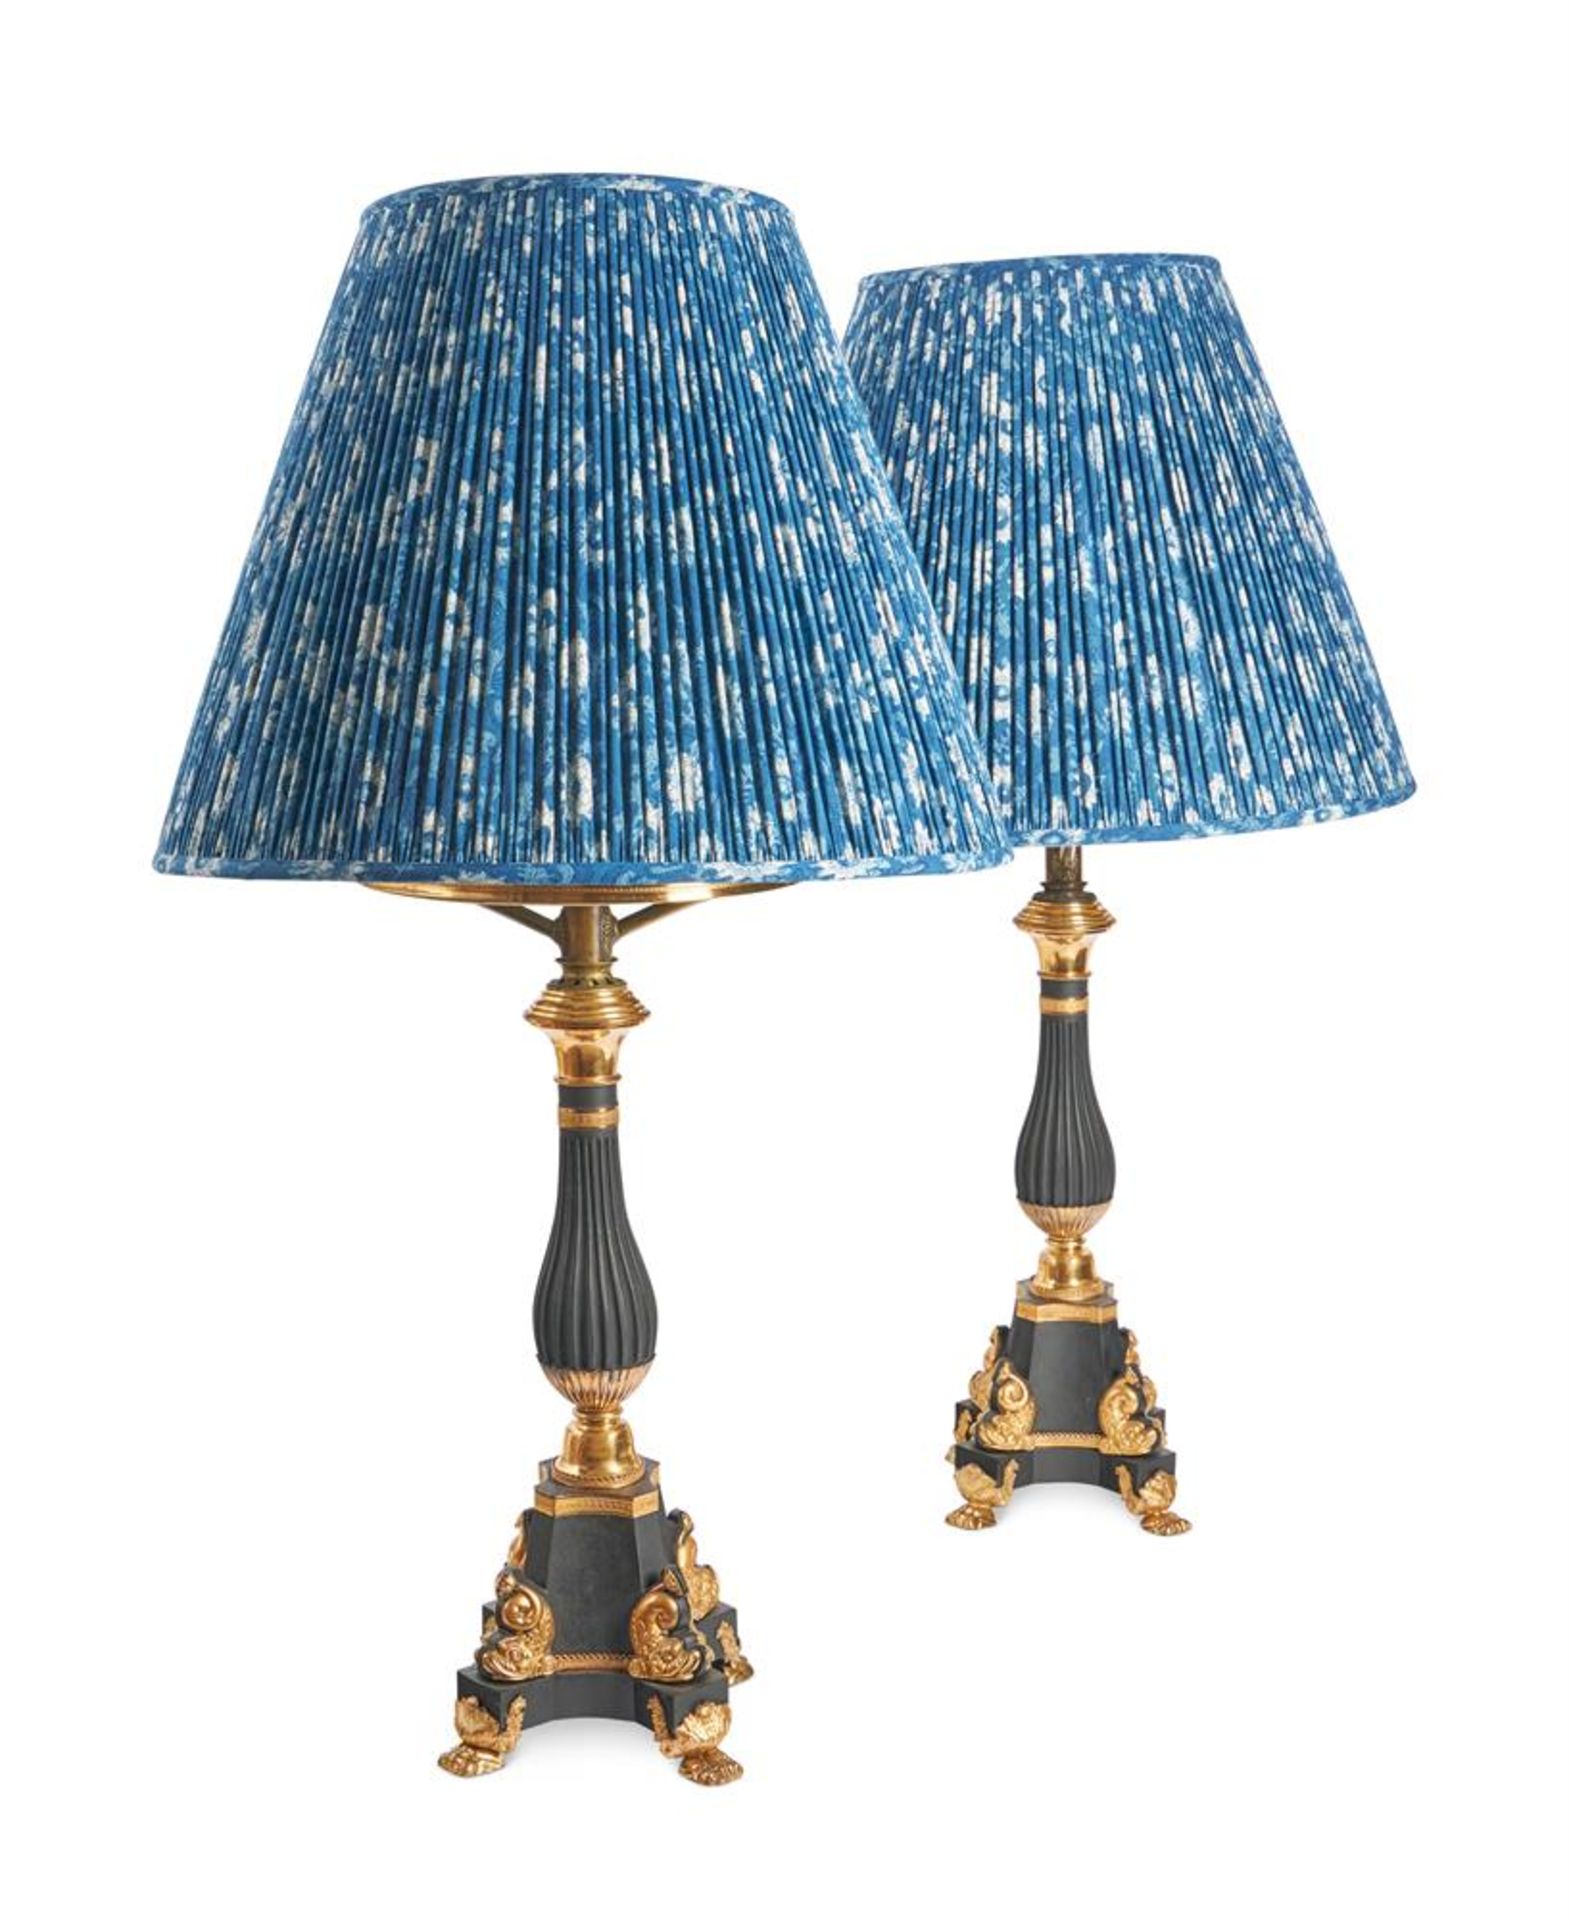 A PAIR OF LOUIS PHILIPPE TOLE PEINTE AND GILT BRONZE LAMP BASES, CIRCA 1820-1840